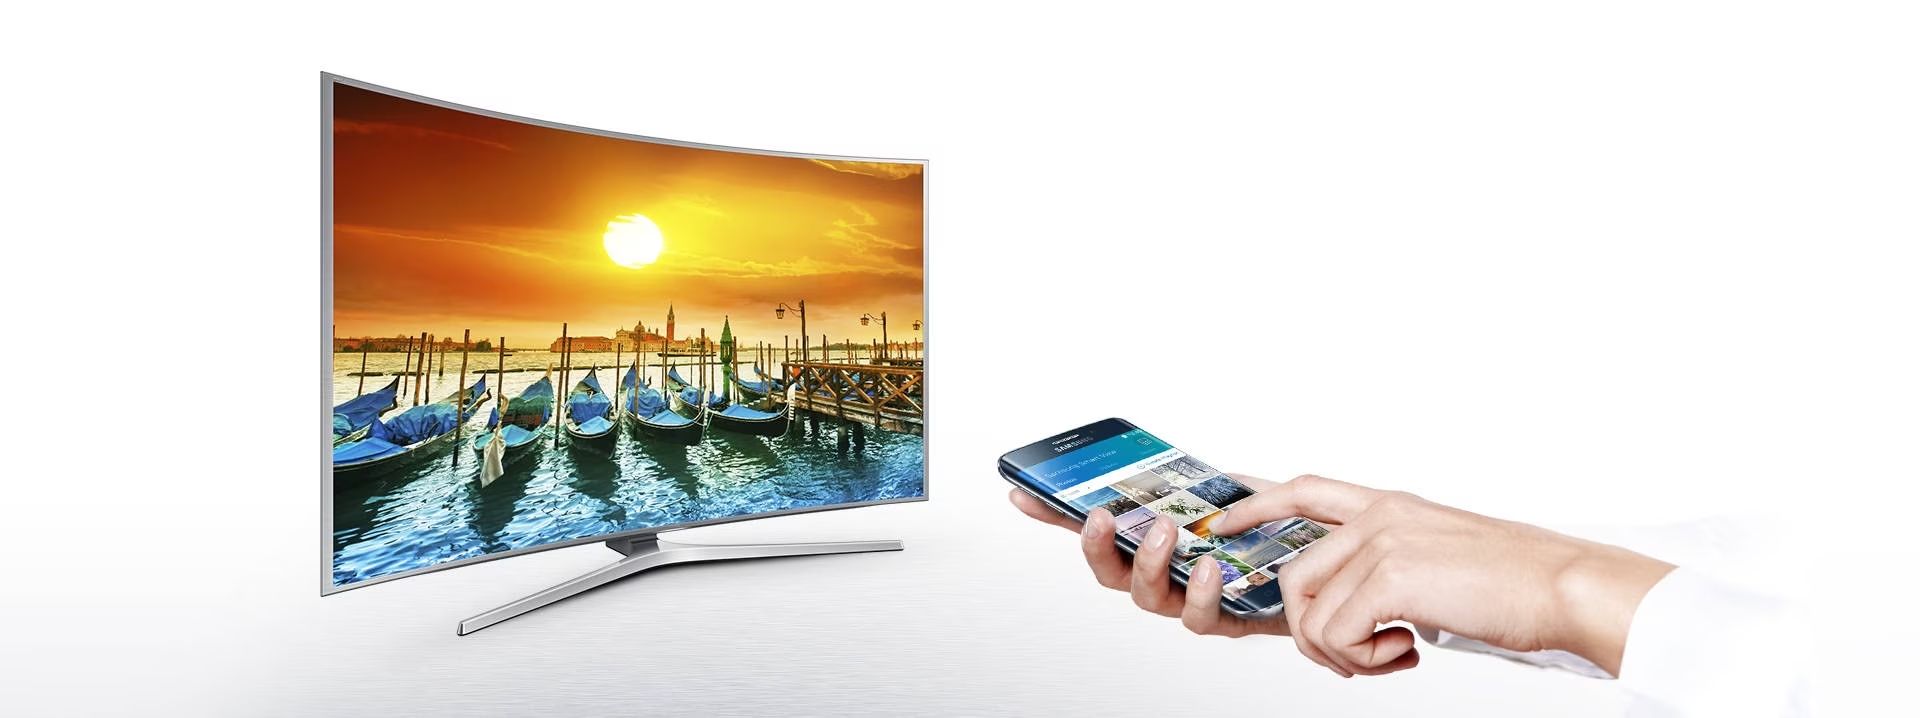 What Apps Can You Get On Samsung Smart TV